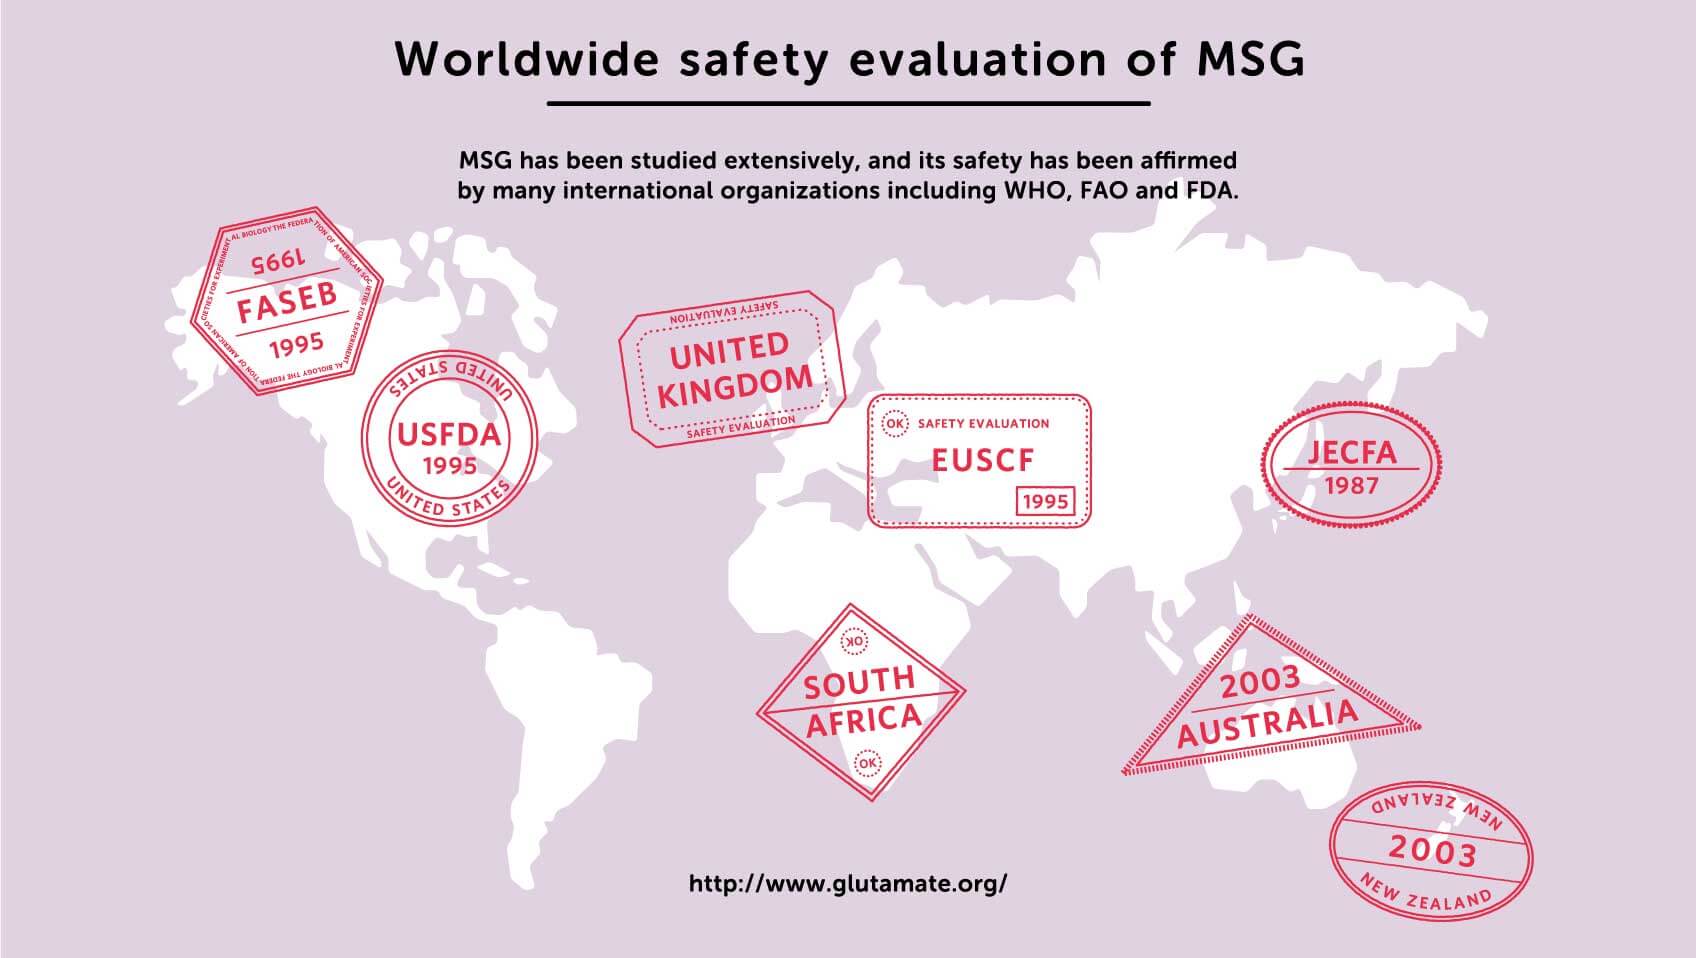 Worldwide safety evaluation of MSG